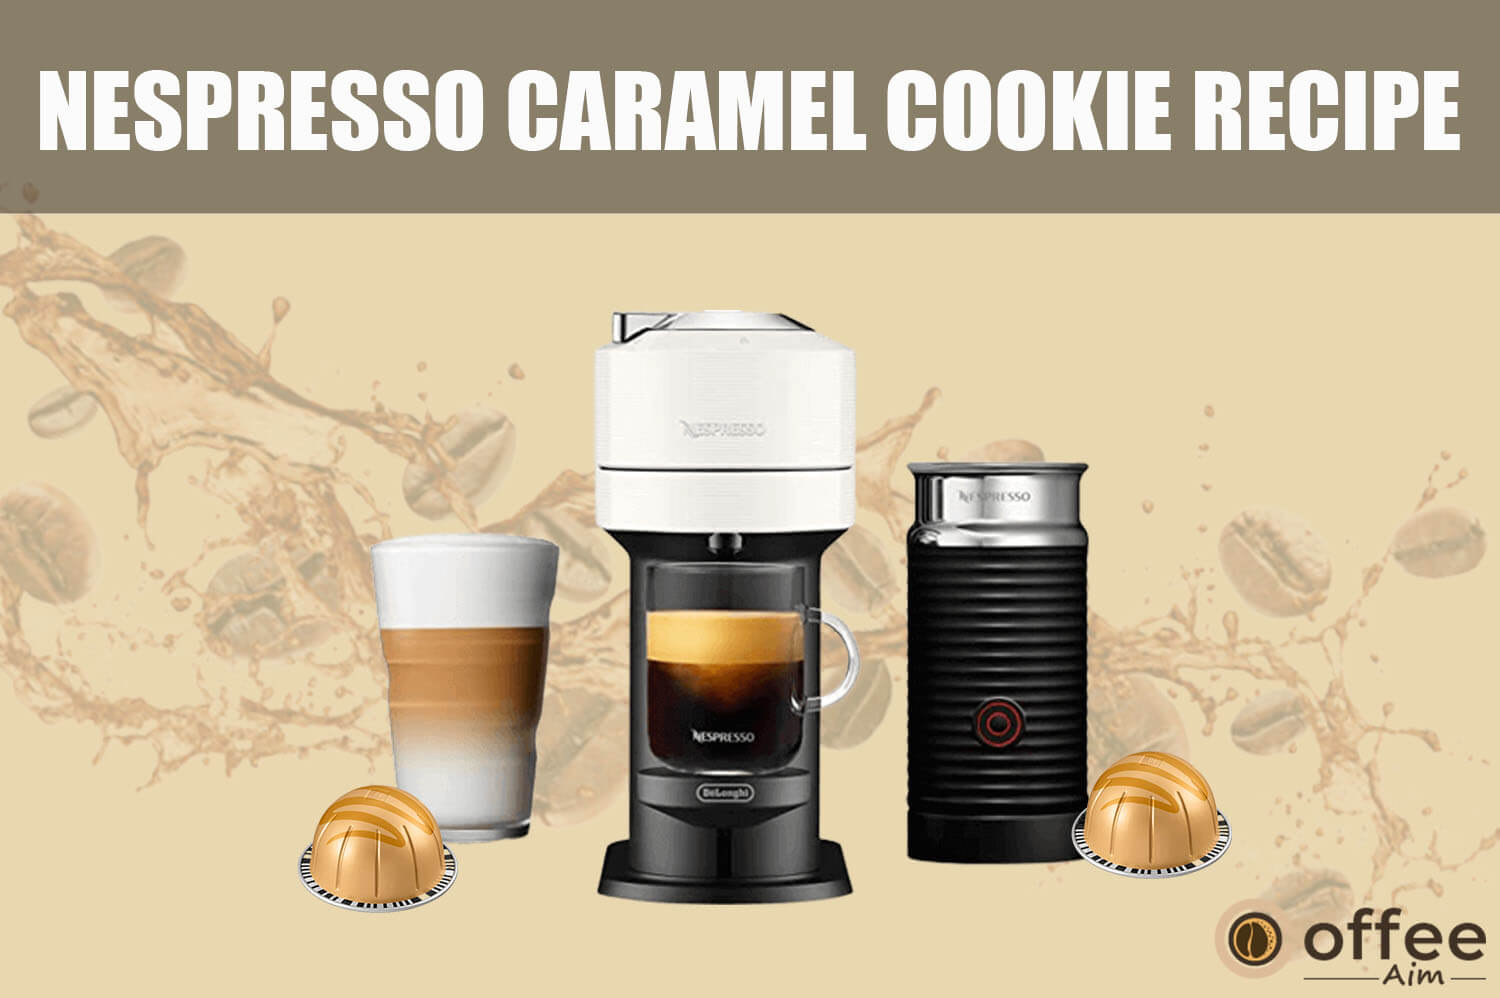 Featured image for the article "Nespresso Caramel Cookie Recipe"